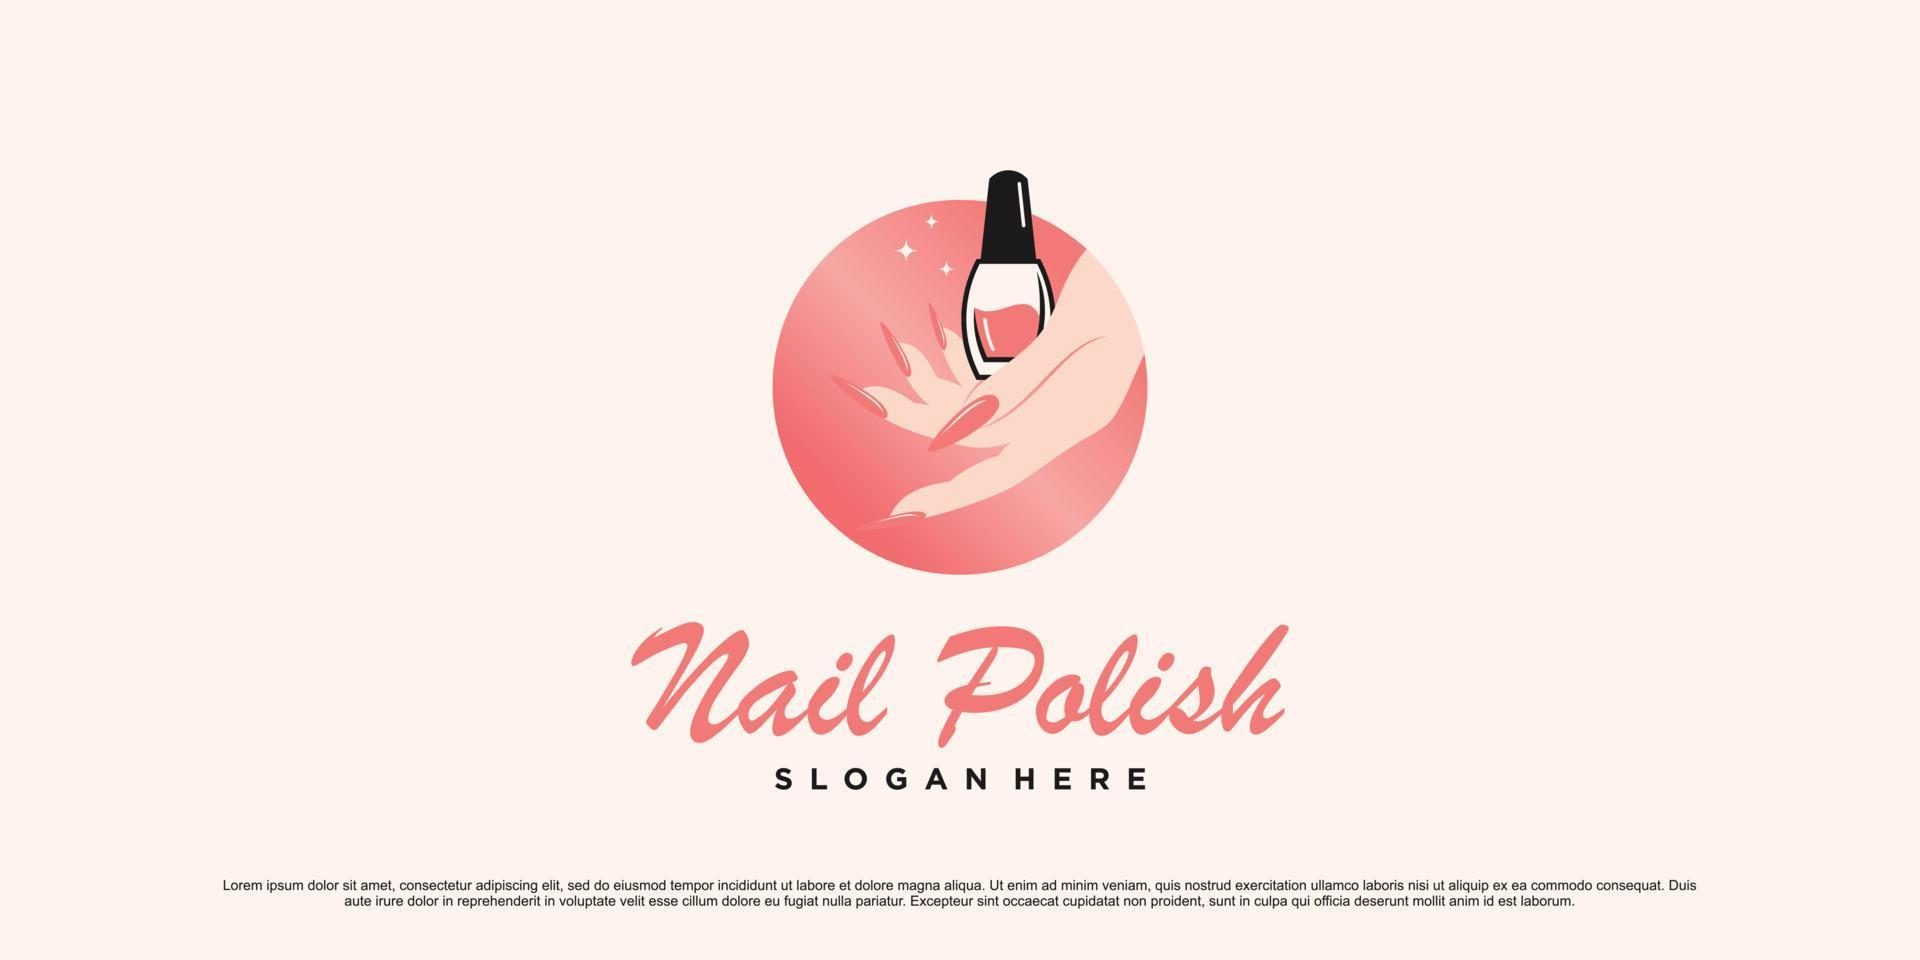 Creative nail polish logo design for manicure salon with woman hand and bottle icon Premium Vector